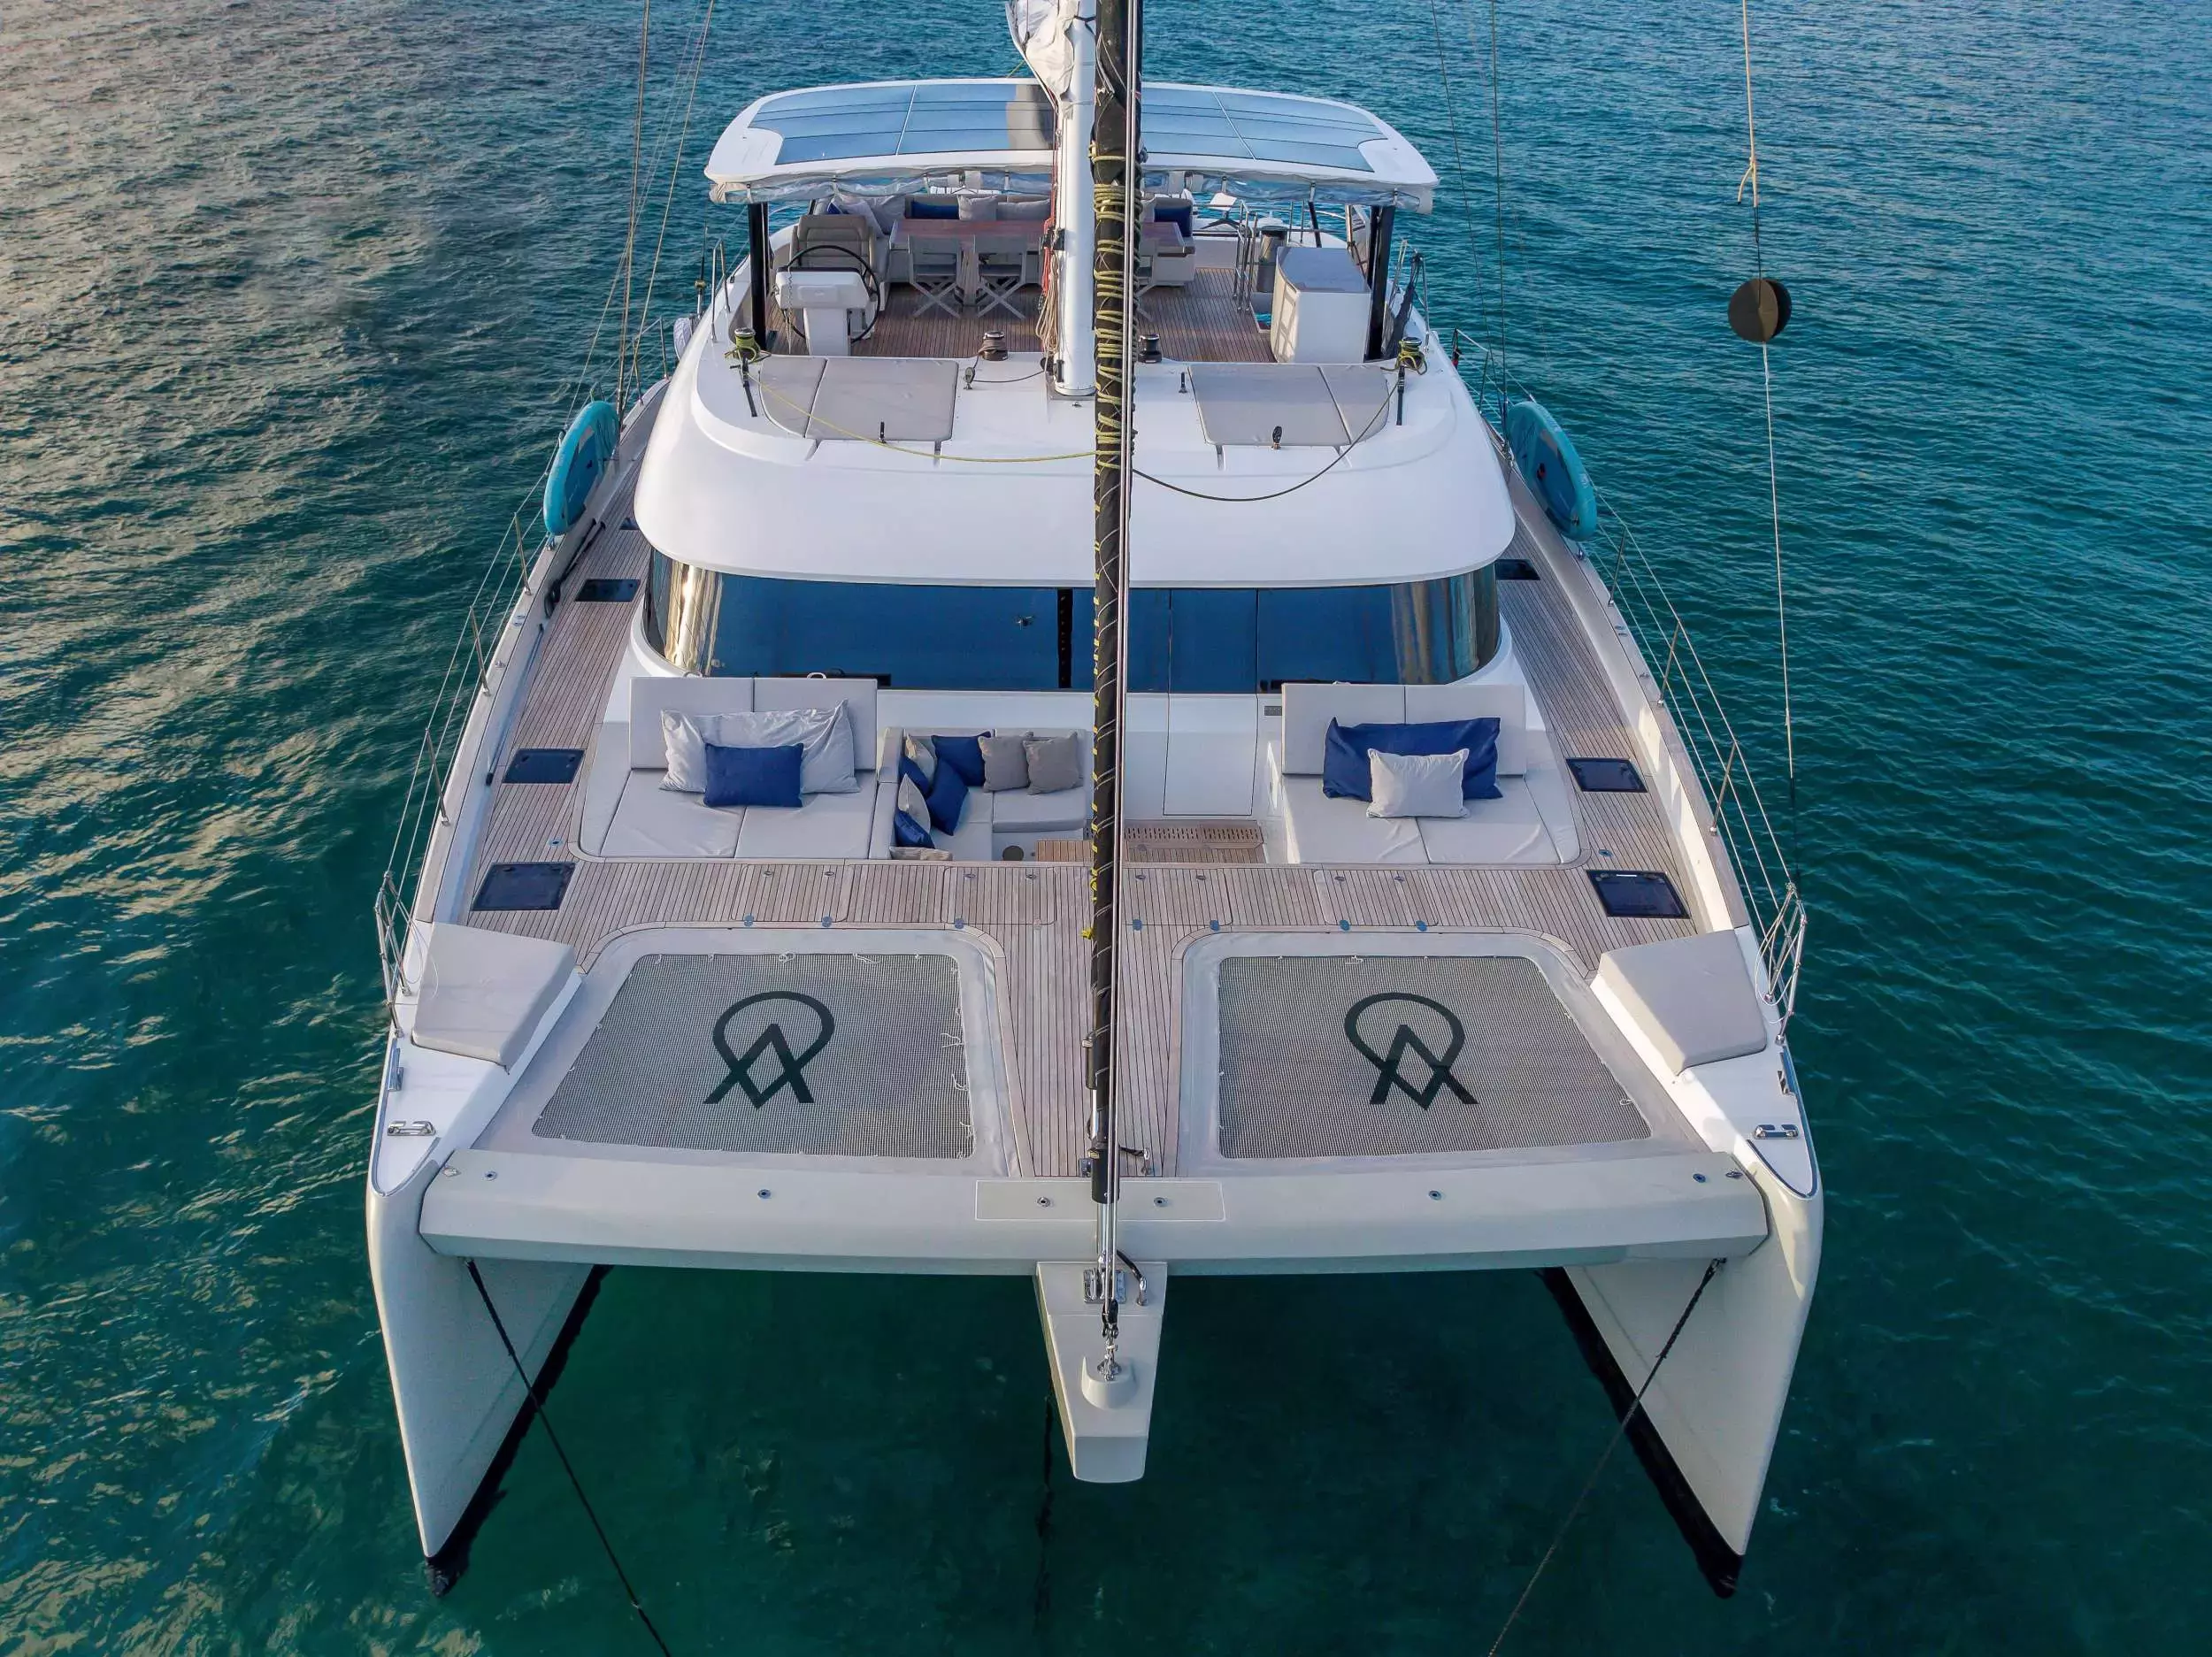 Valentine by Sunreef Yachts - Special Offer for a private Power Catamaran Rental in Virgin Gorda with a crew